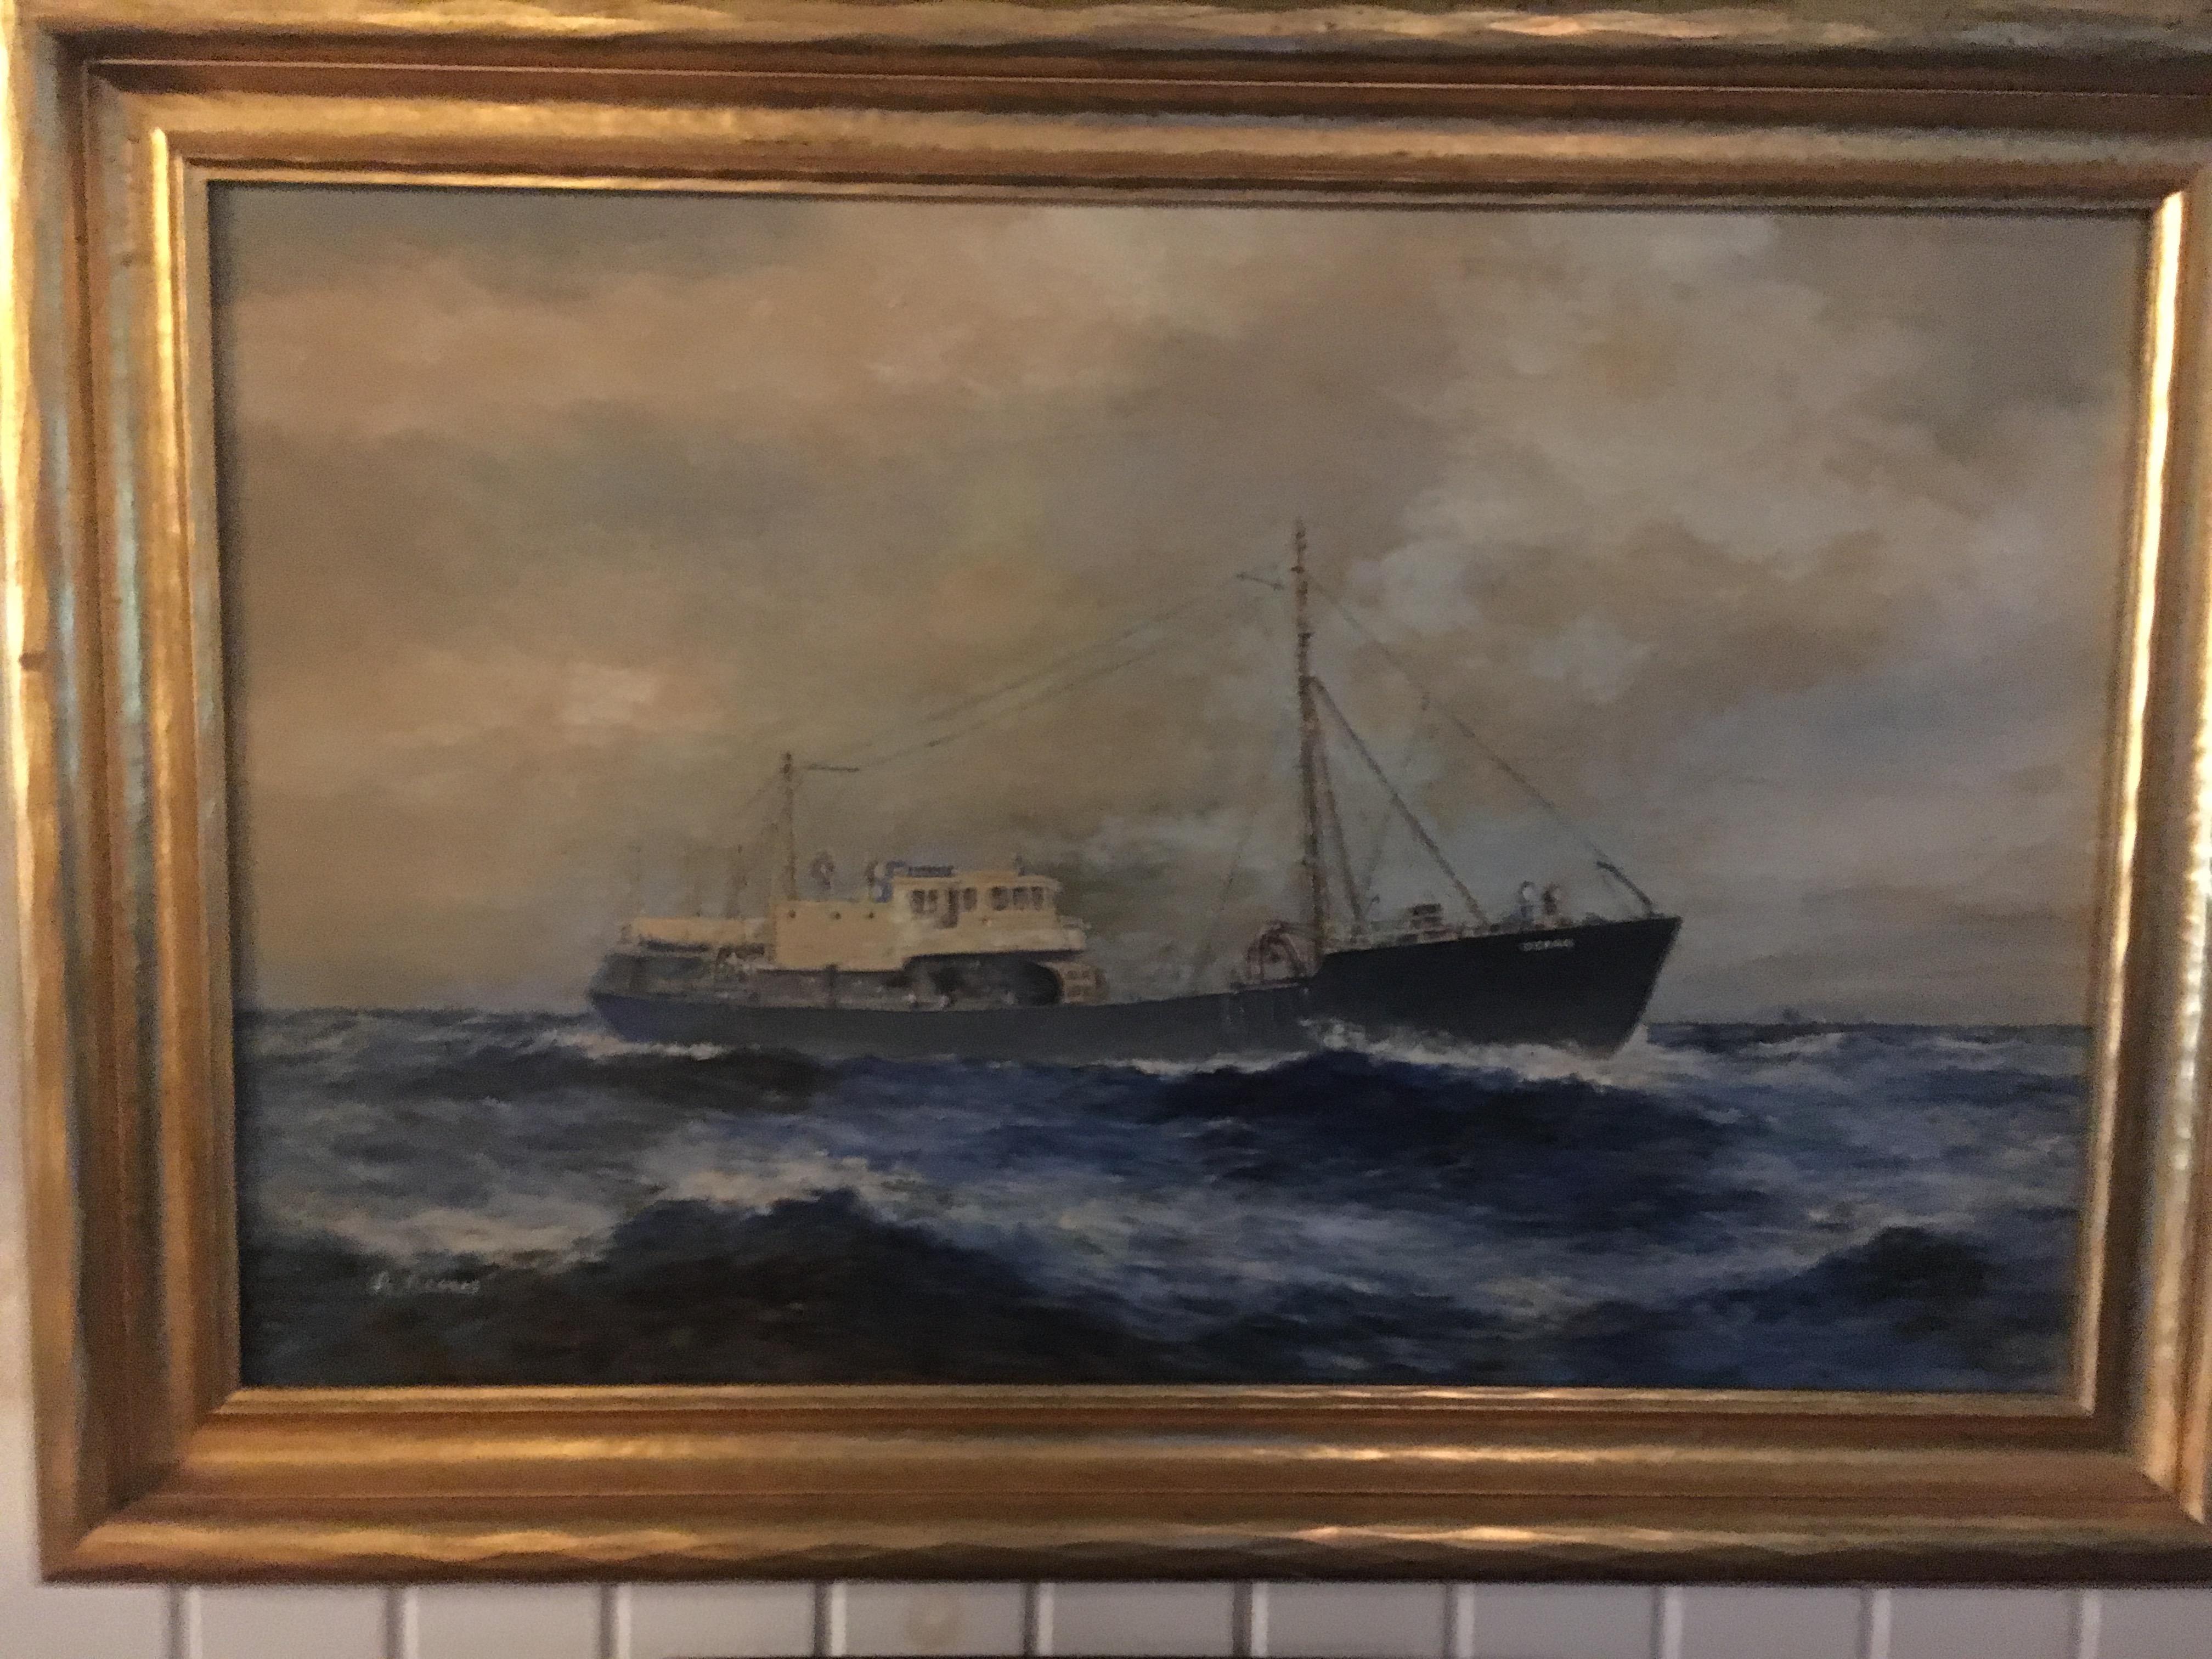 ship paintings by famous artists